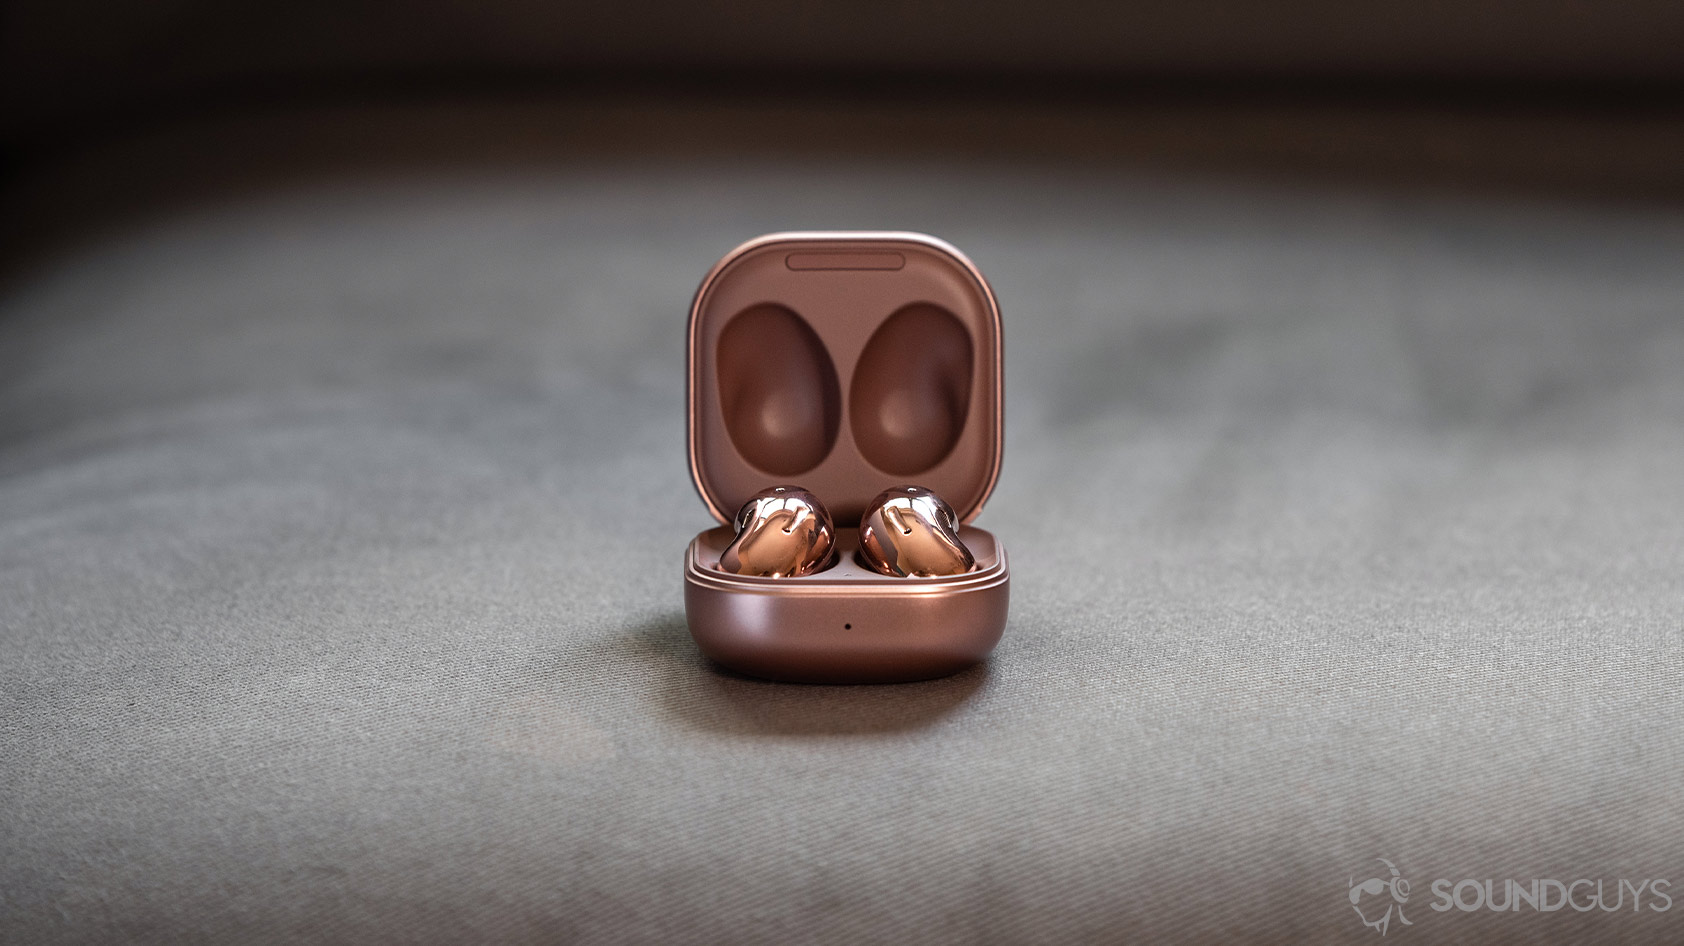 A picture of the Samsung Galaxy Buds Live noise canceling true wireless earbuds in the case against a gray background.